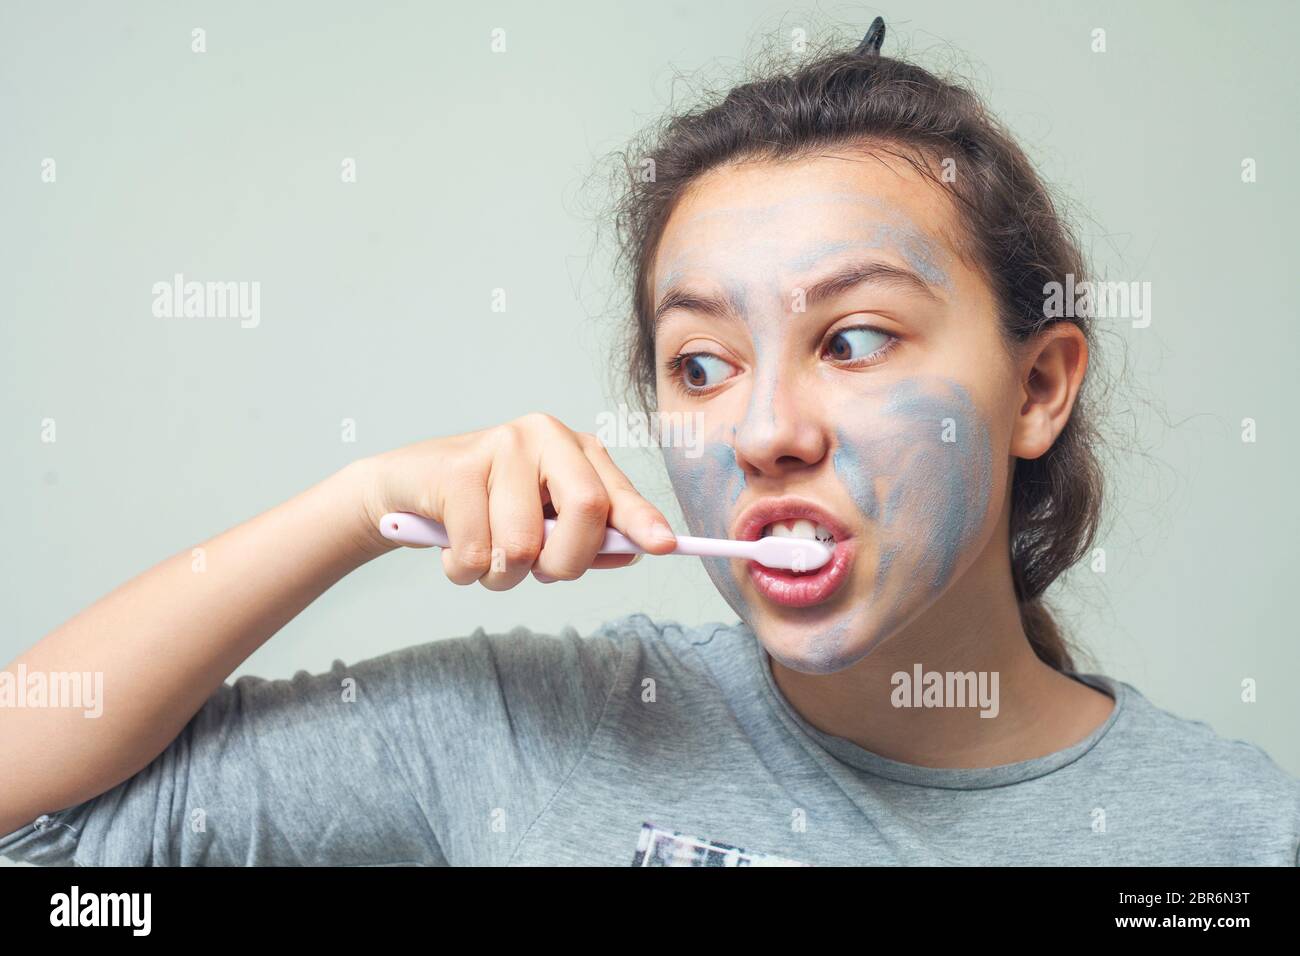 A teenage girl with a cosmetic mask on her face brushes her teeth. Facial scrub mask. The concept of health and beauty. Stock Photo